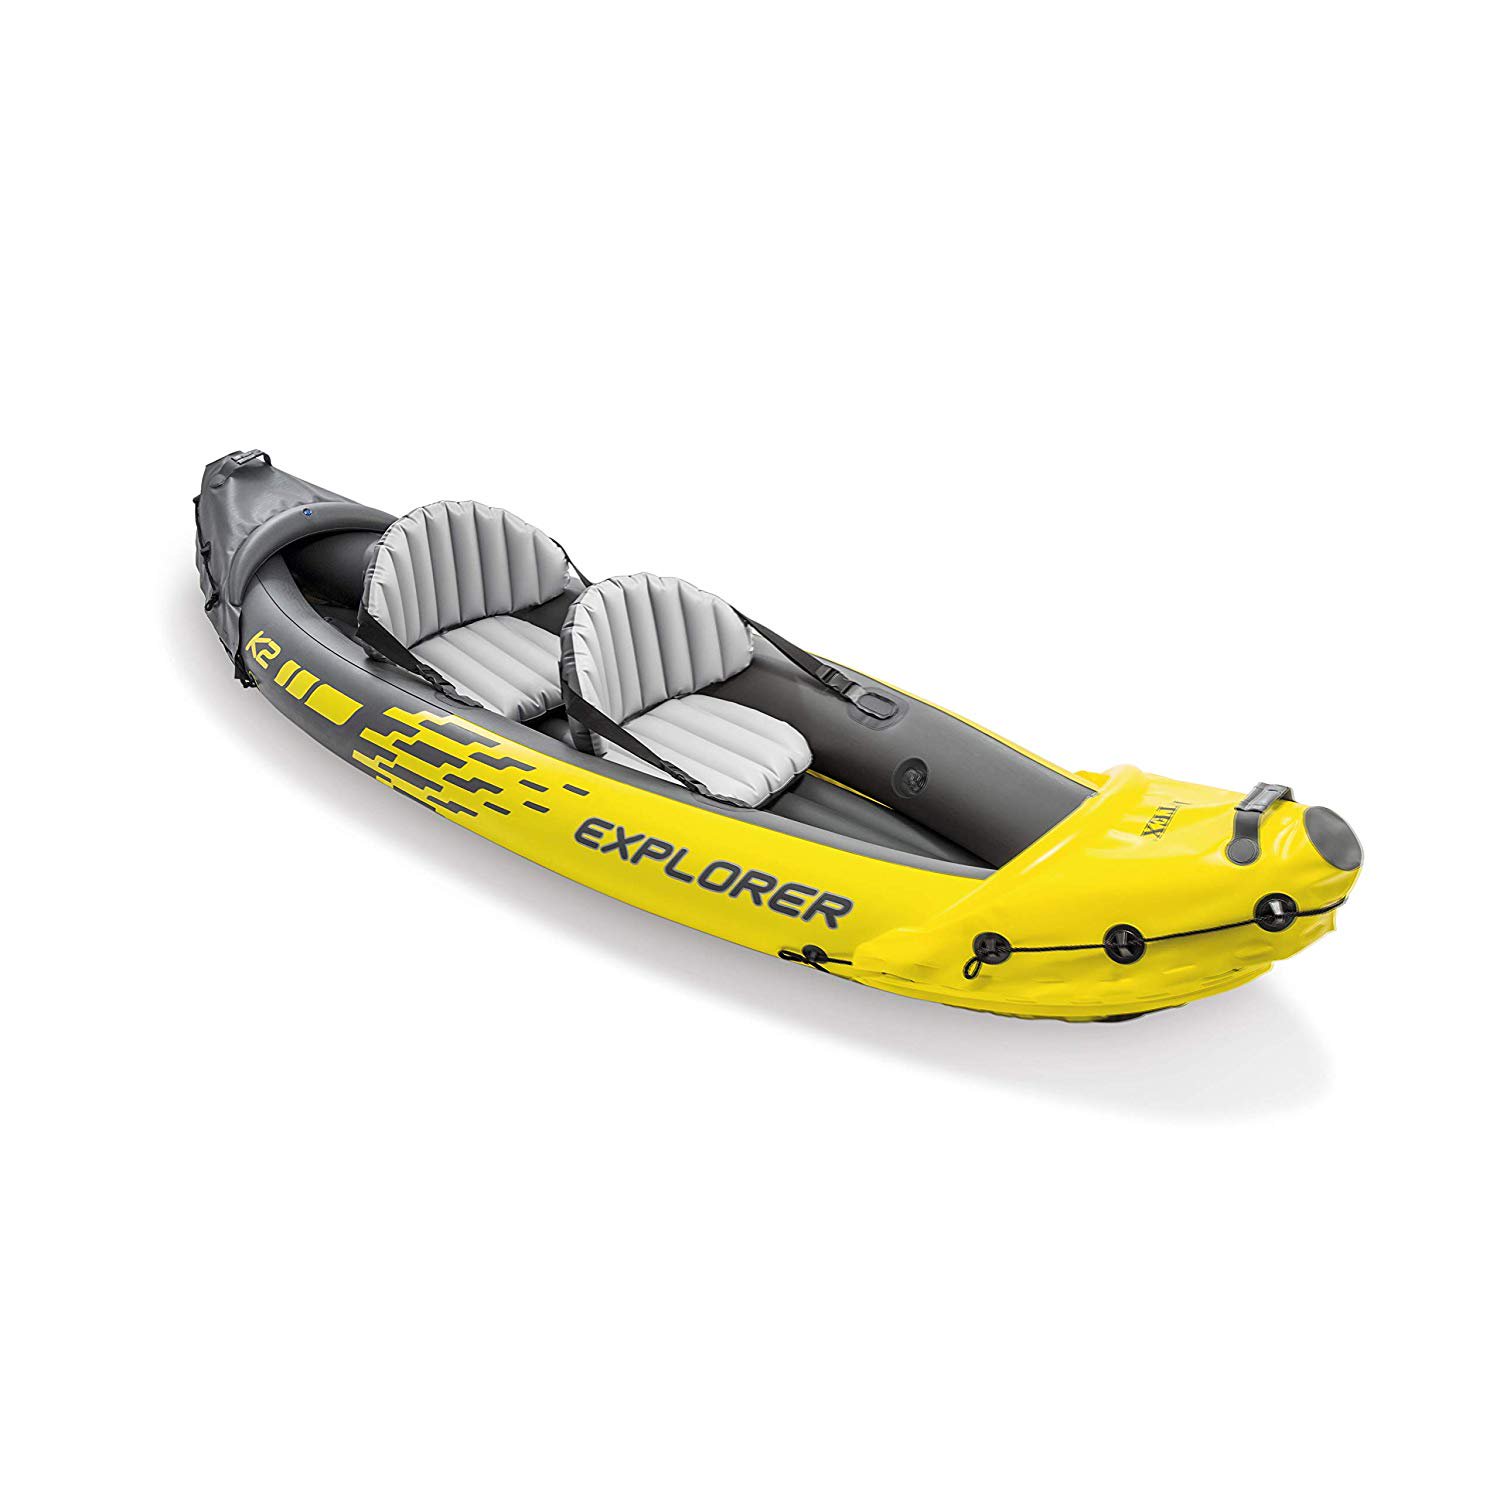 kalligraf Hotel Sund mad Intex Explorer Sit-in 2 Person 10.25-ft Plastic Kayak in the Kayaks  department at Lowes.com